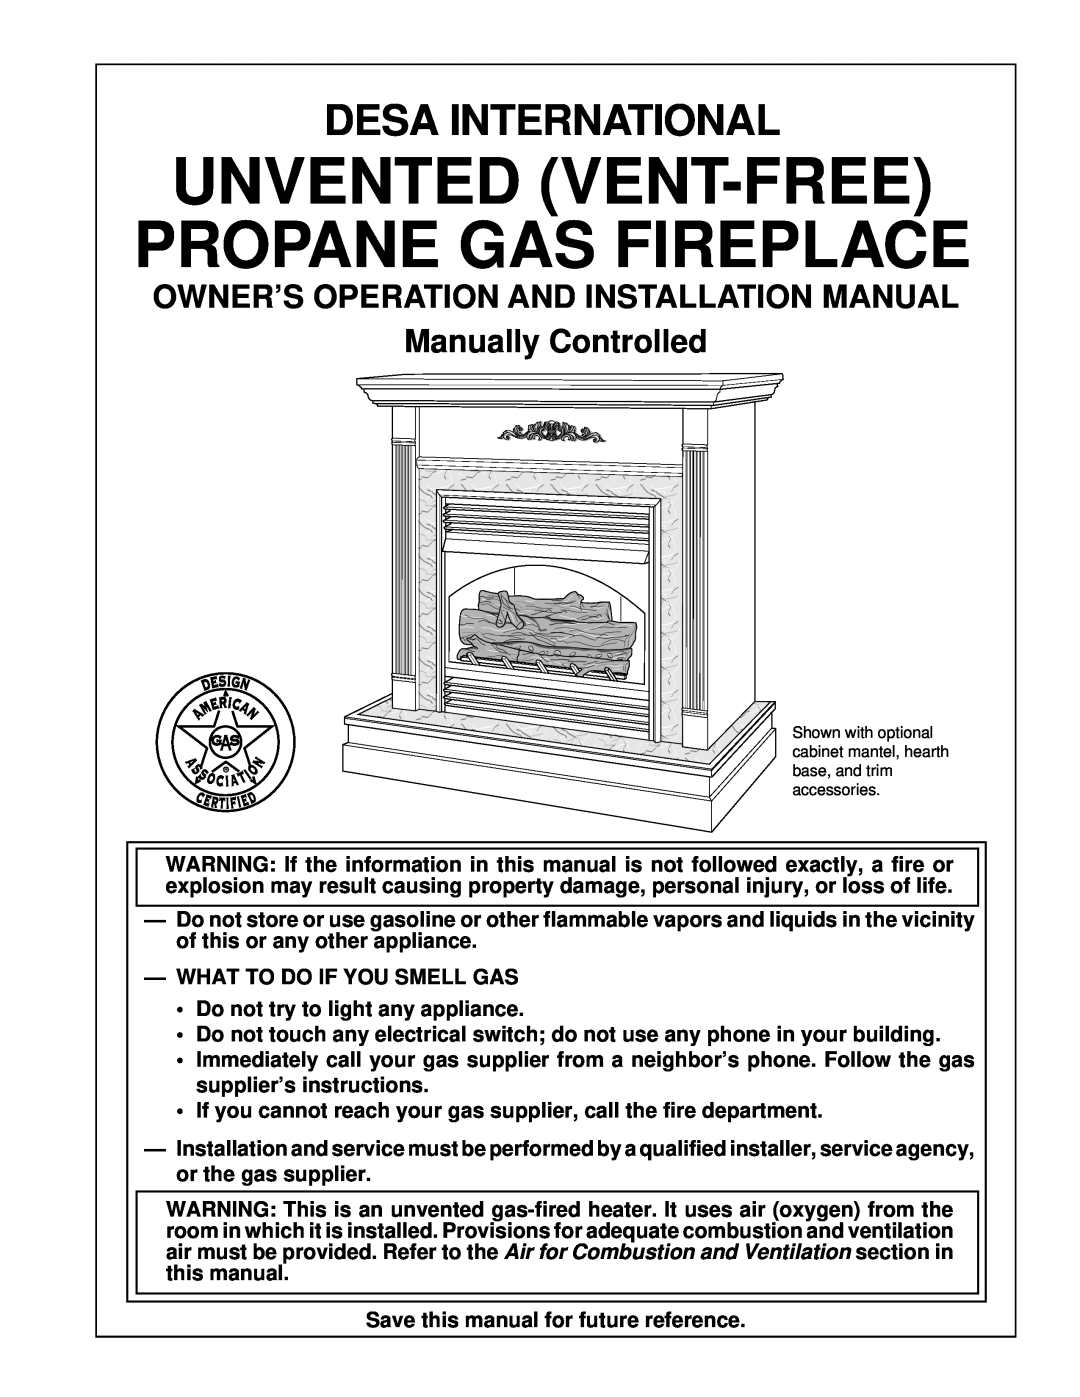 Desa UNVENTED (VENT-FREE) PROPANE GAS FIREPLACE installation manual Owner’S Operation And Installation Manual 